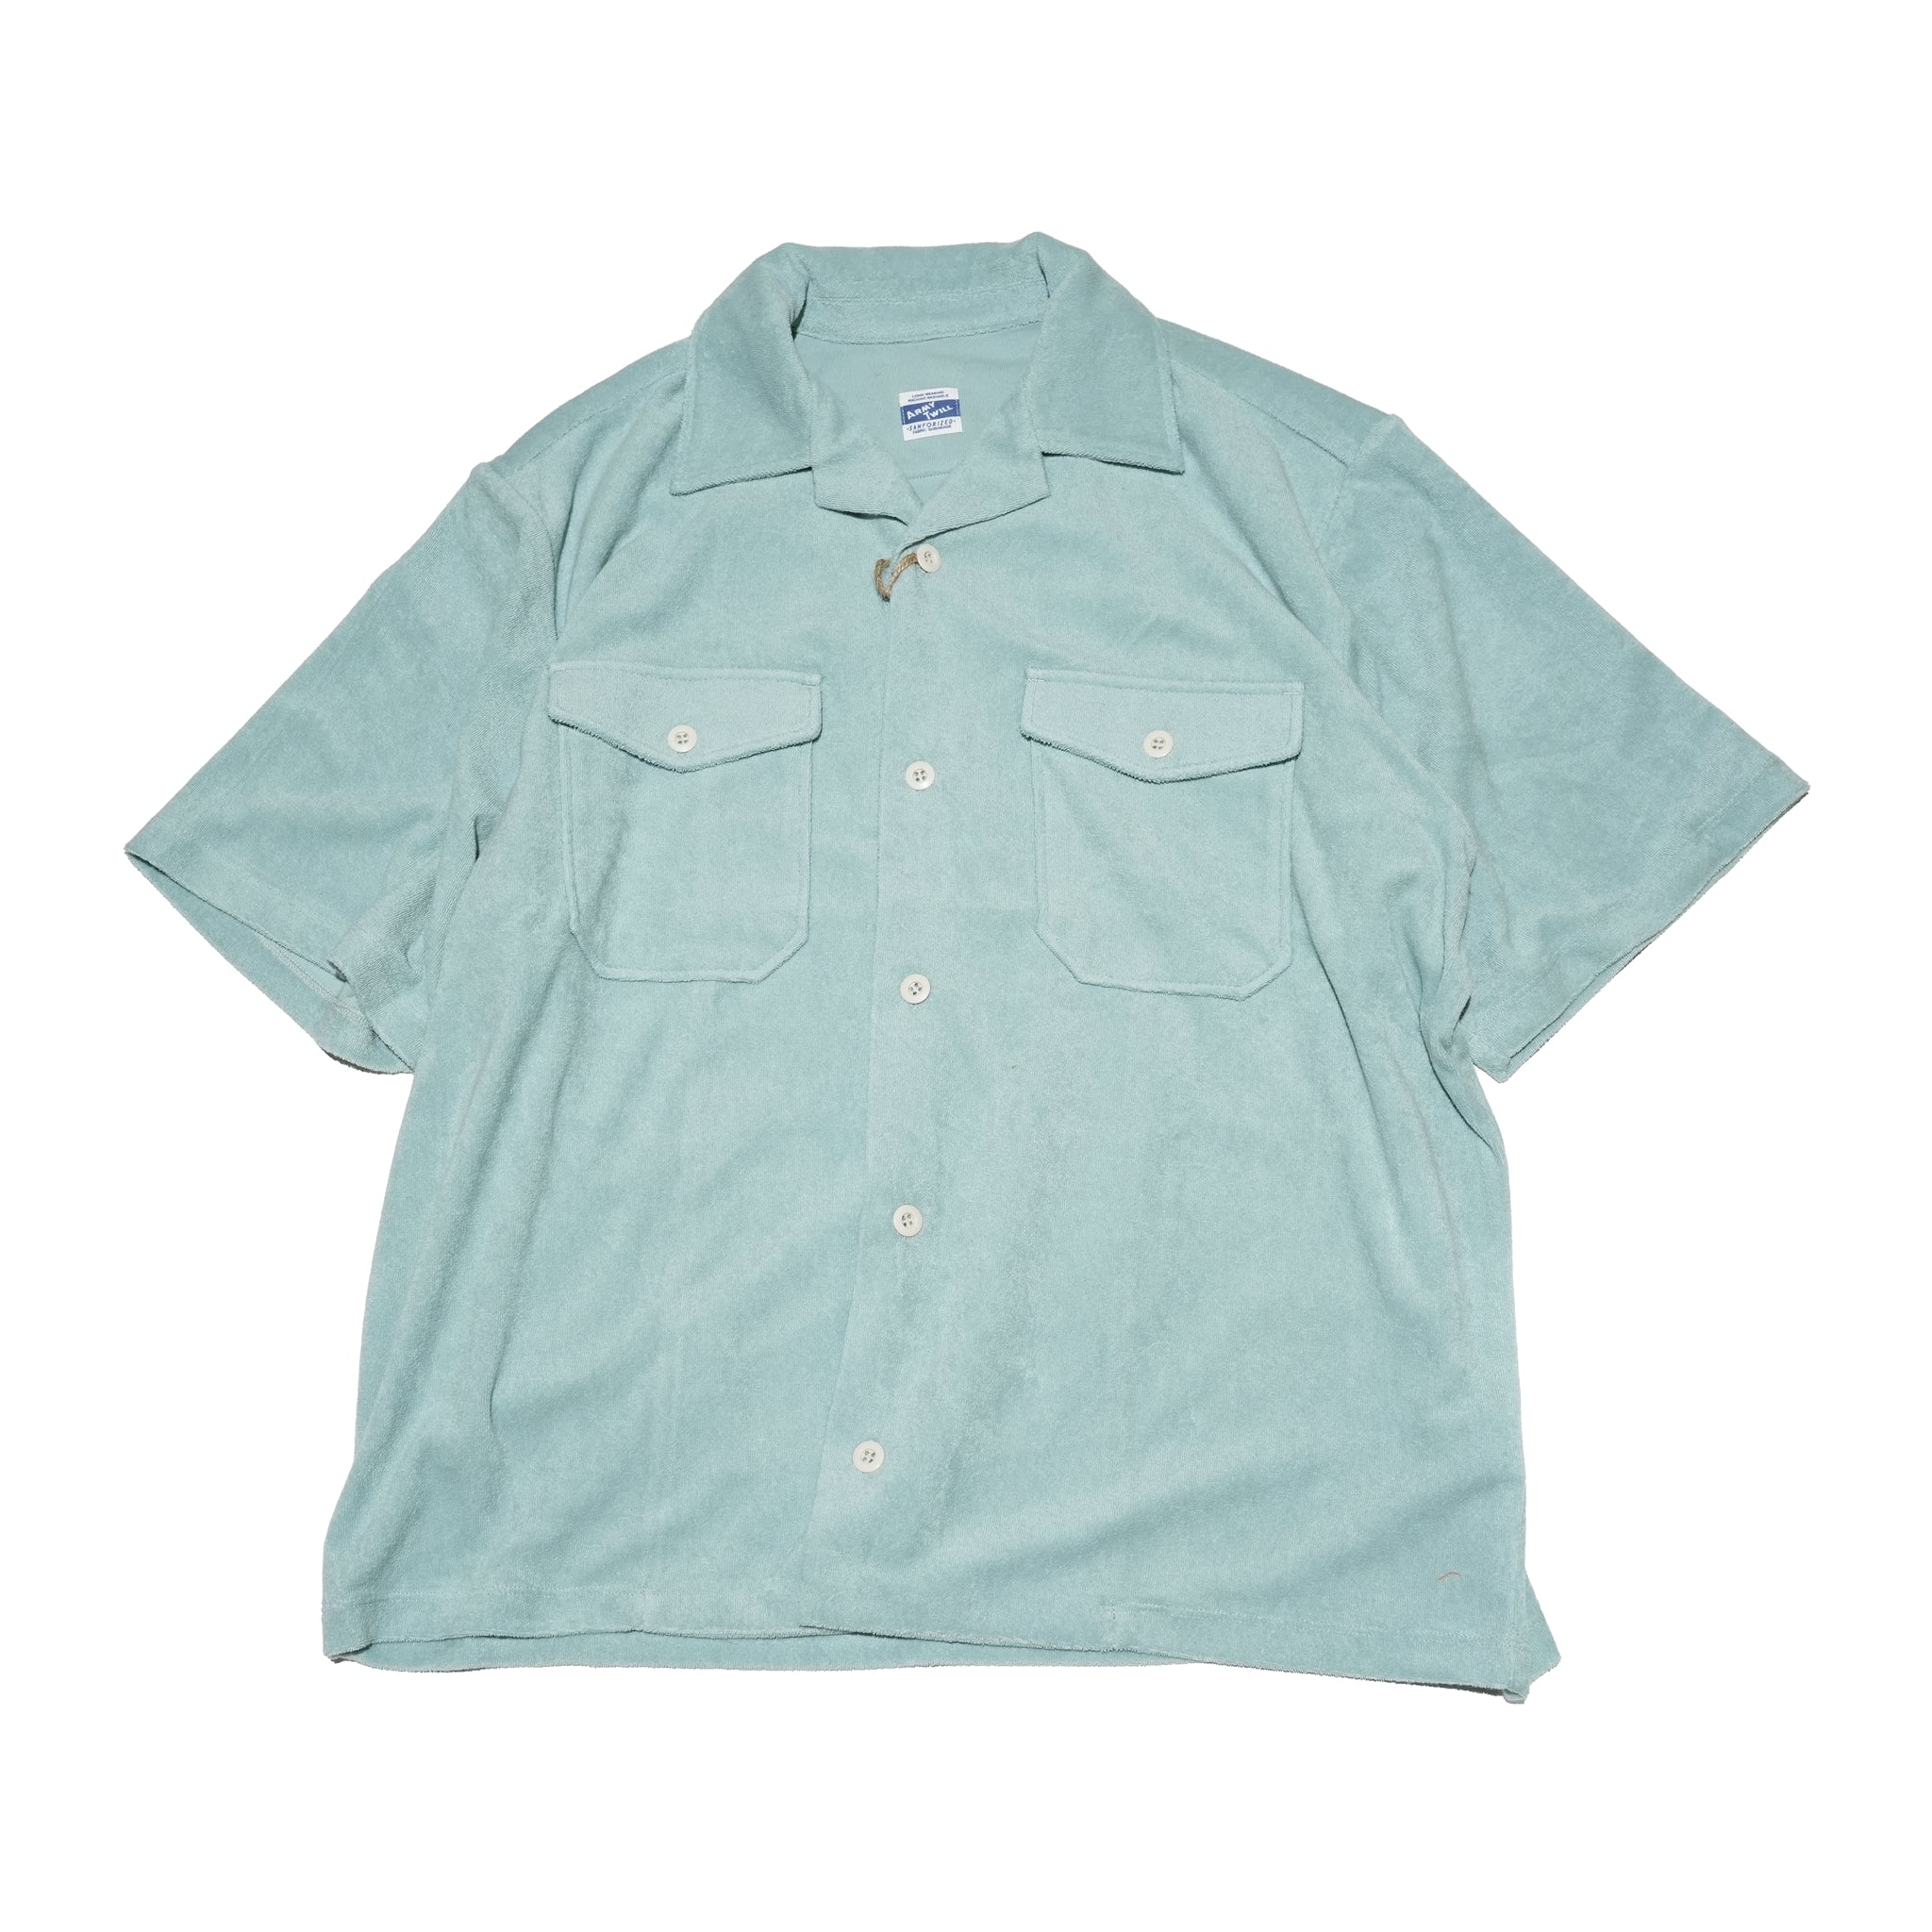 No:AM-2417010 | Name:Pile Utility Shirt | Color:Blue/Orange【ARMYTWILL_アーミーツイル】